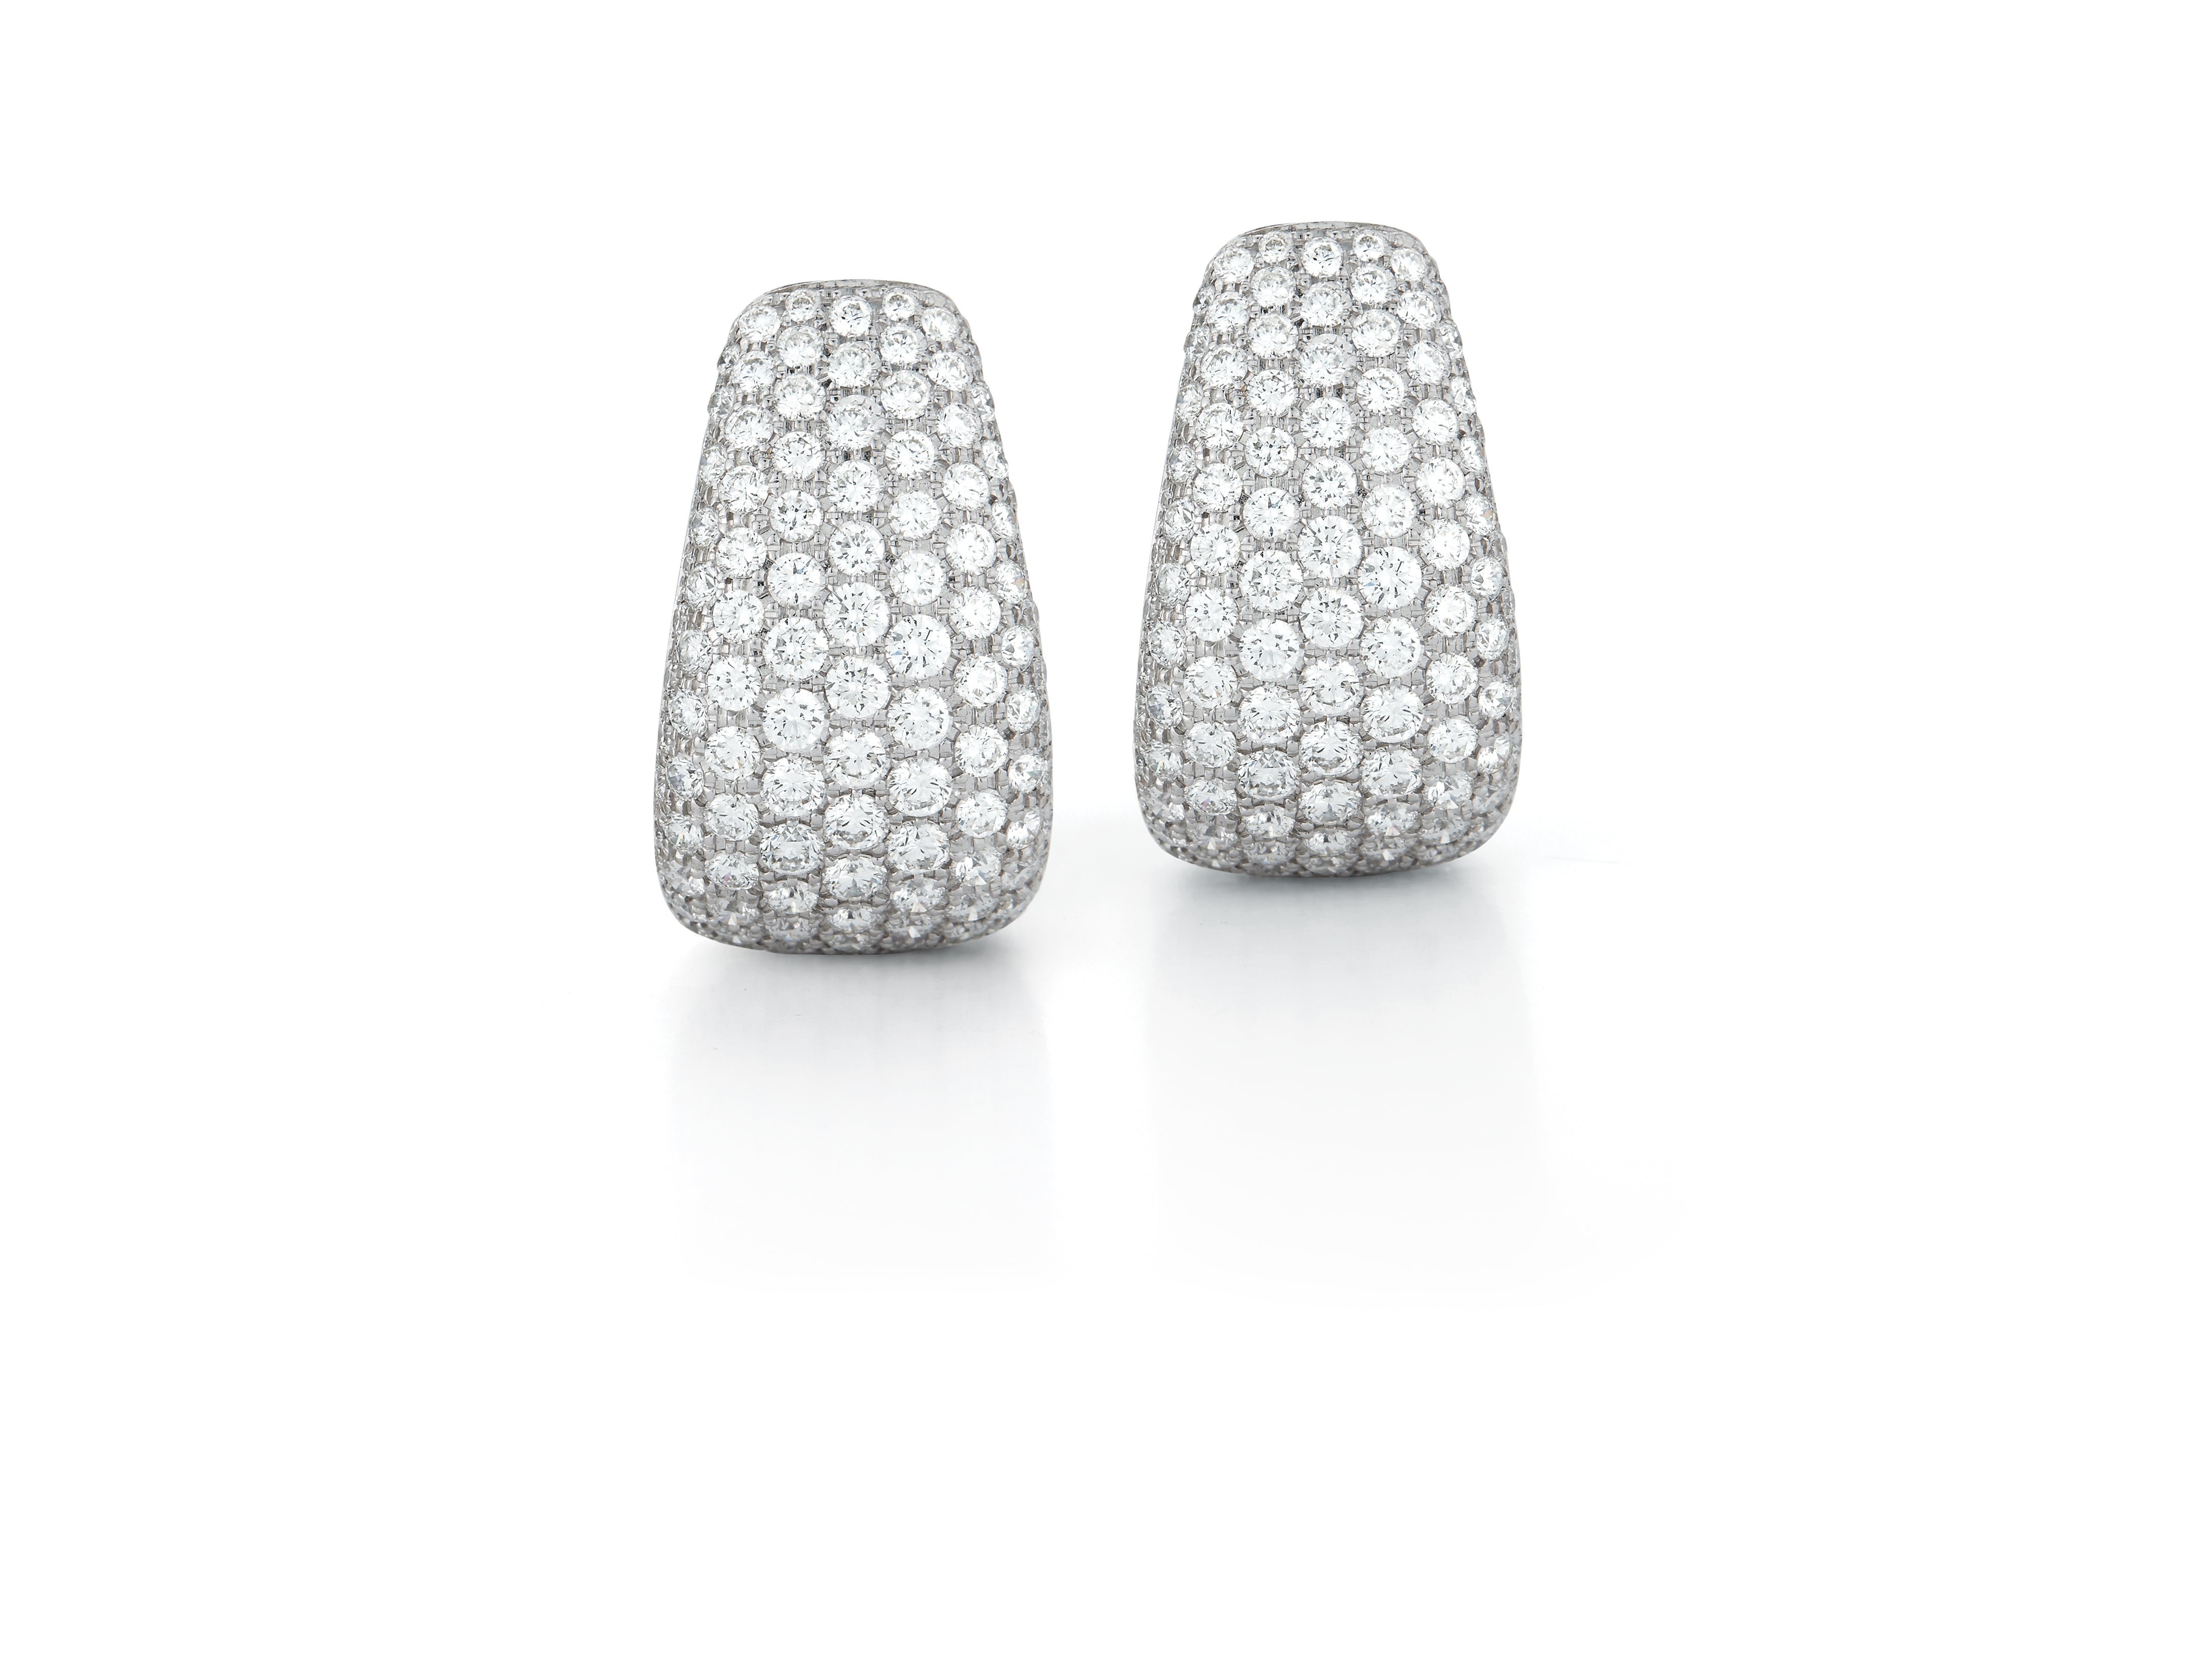 A pair of Buckle Earrings in Diamonds set in 18K White Gold. Signed Seaman Schepps.